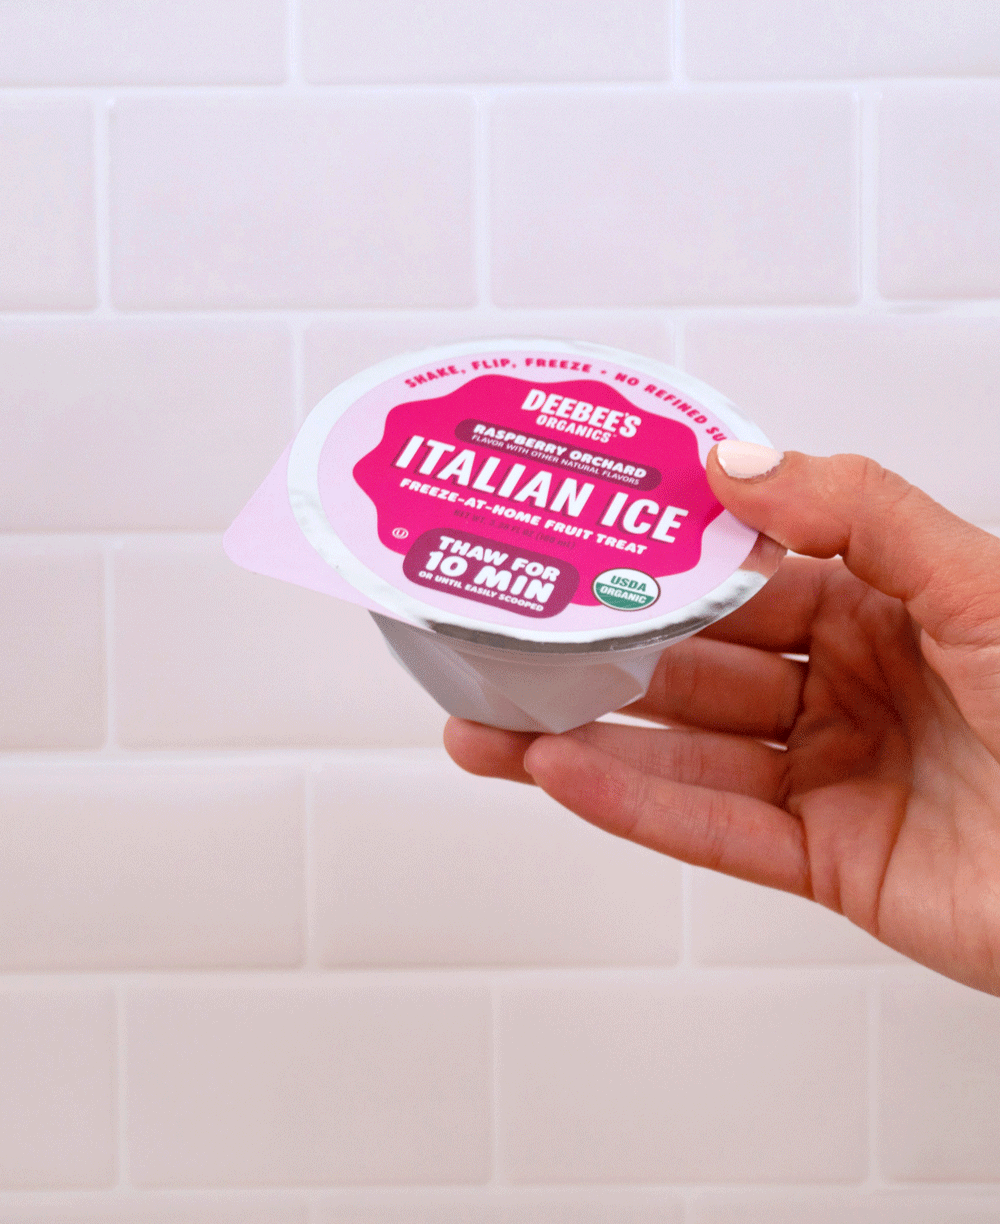 A hand shakes a DeeBee's Organics Italian Ice cup against a white tile background.